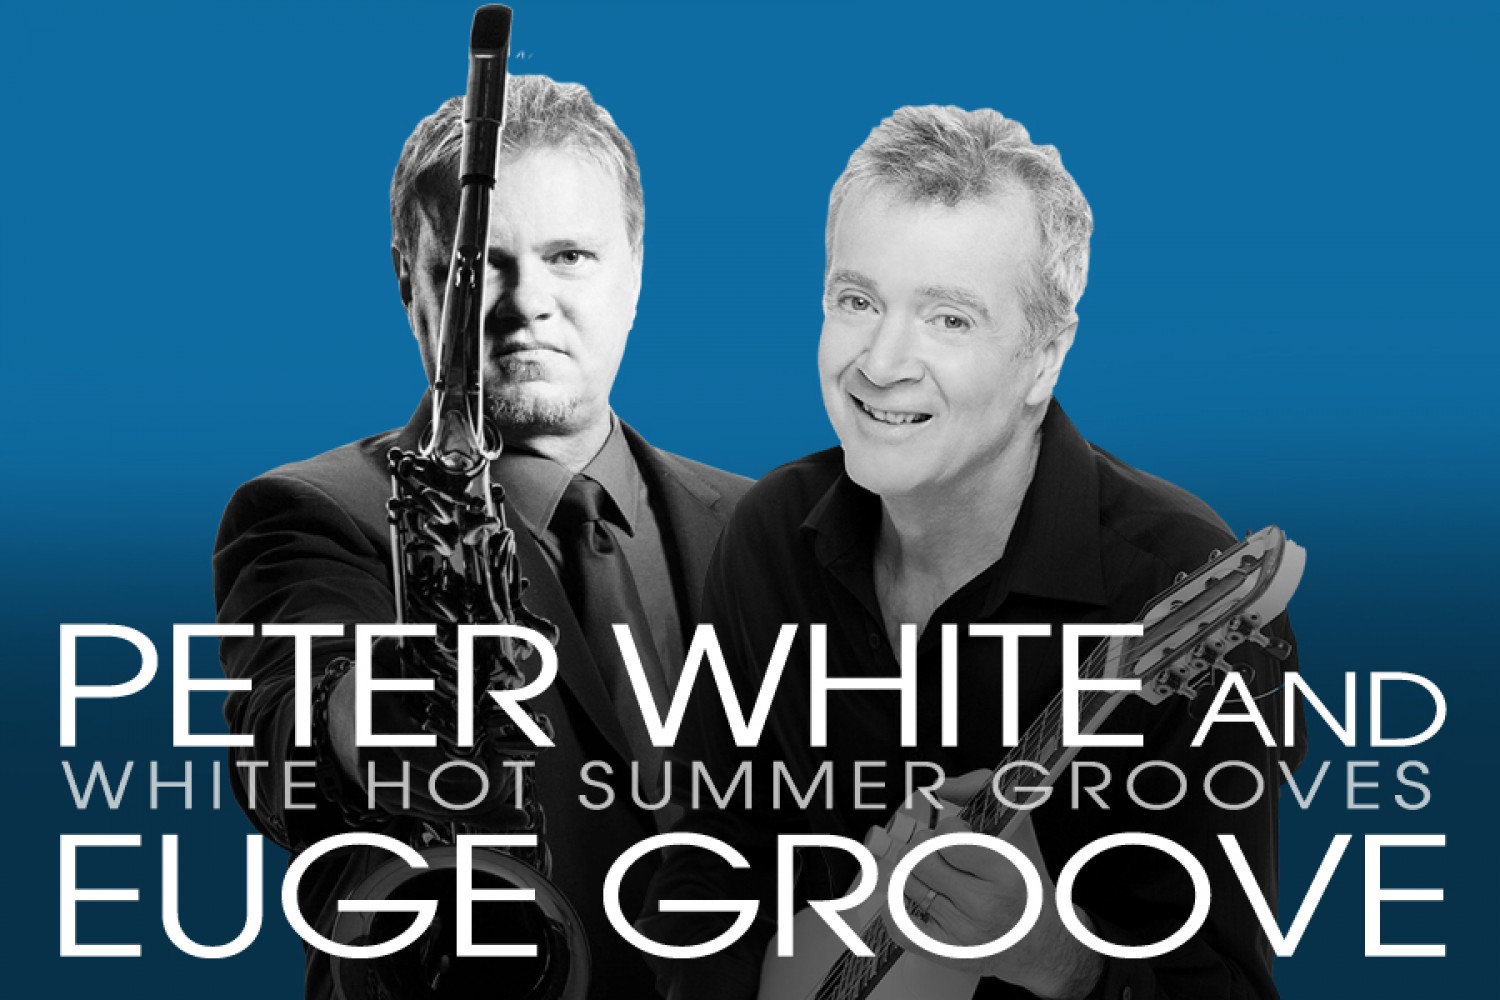 Peter White and Euge Groove White Hot Summer GroovesShow The Lyric